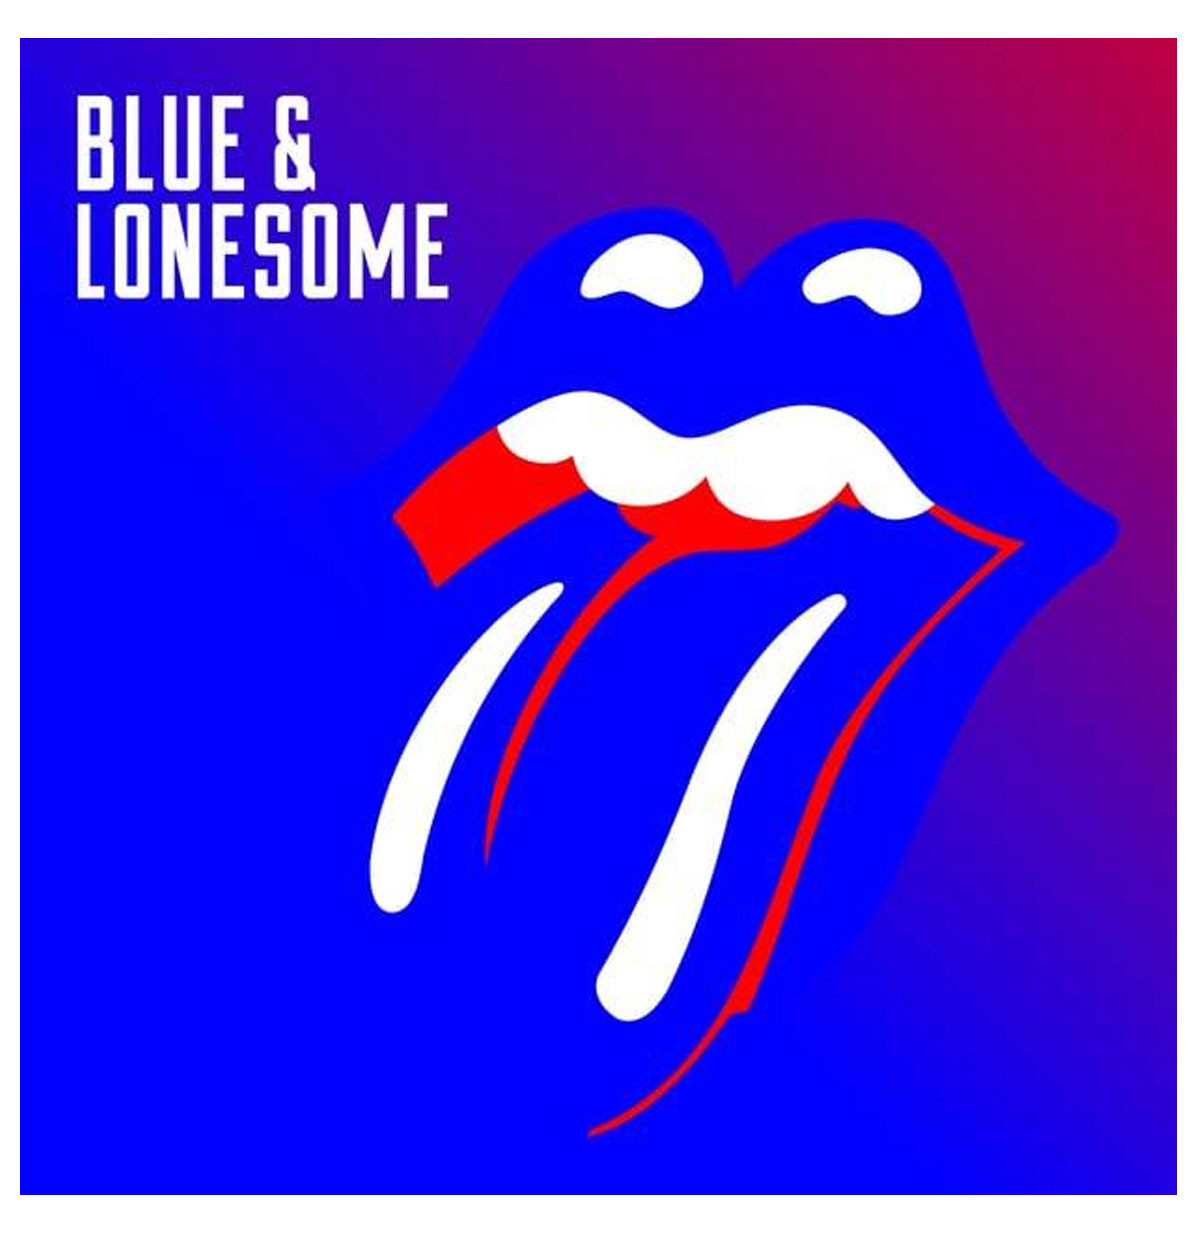 Rolling Stones - Blue & Lonesome 2-LP